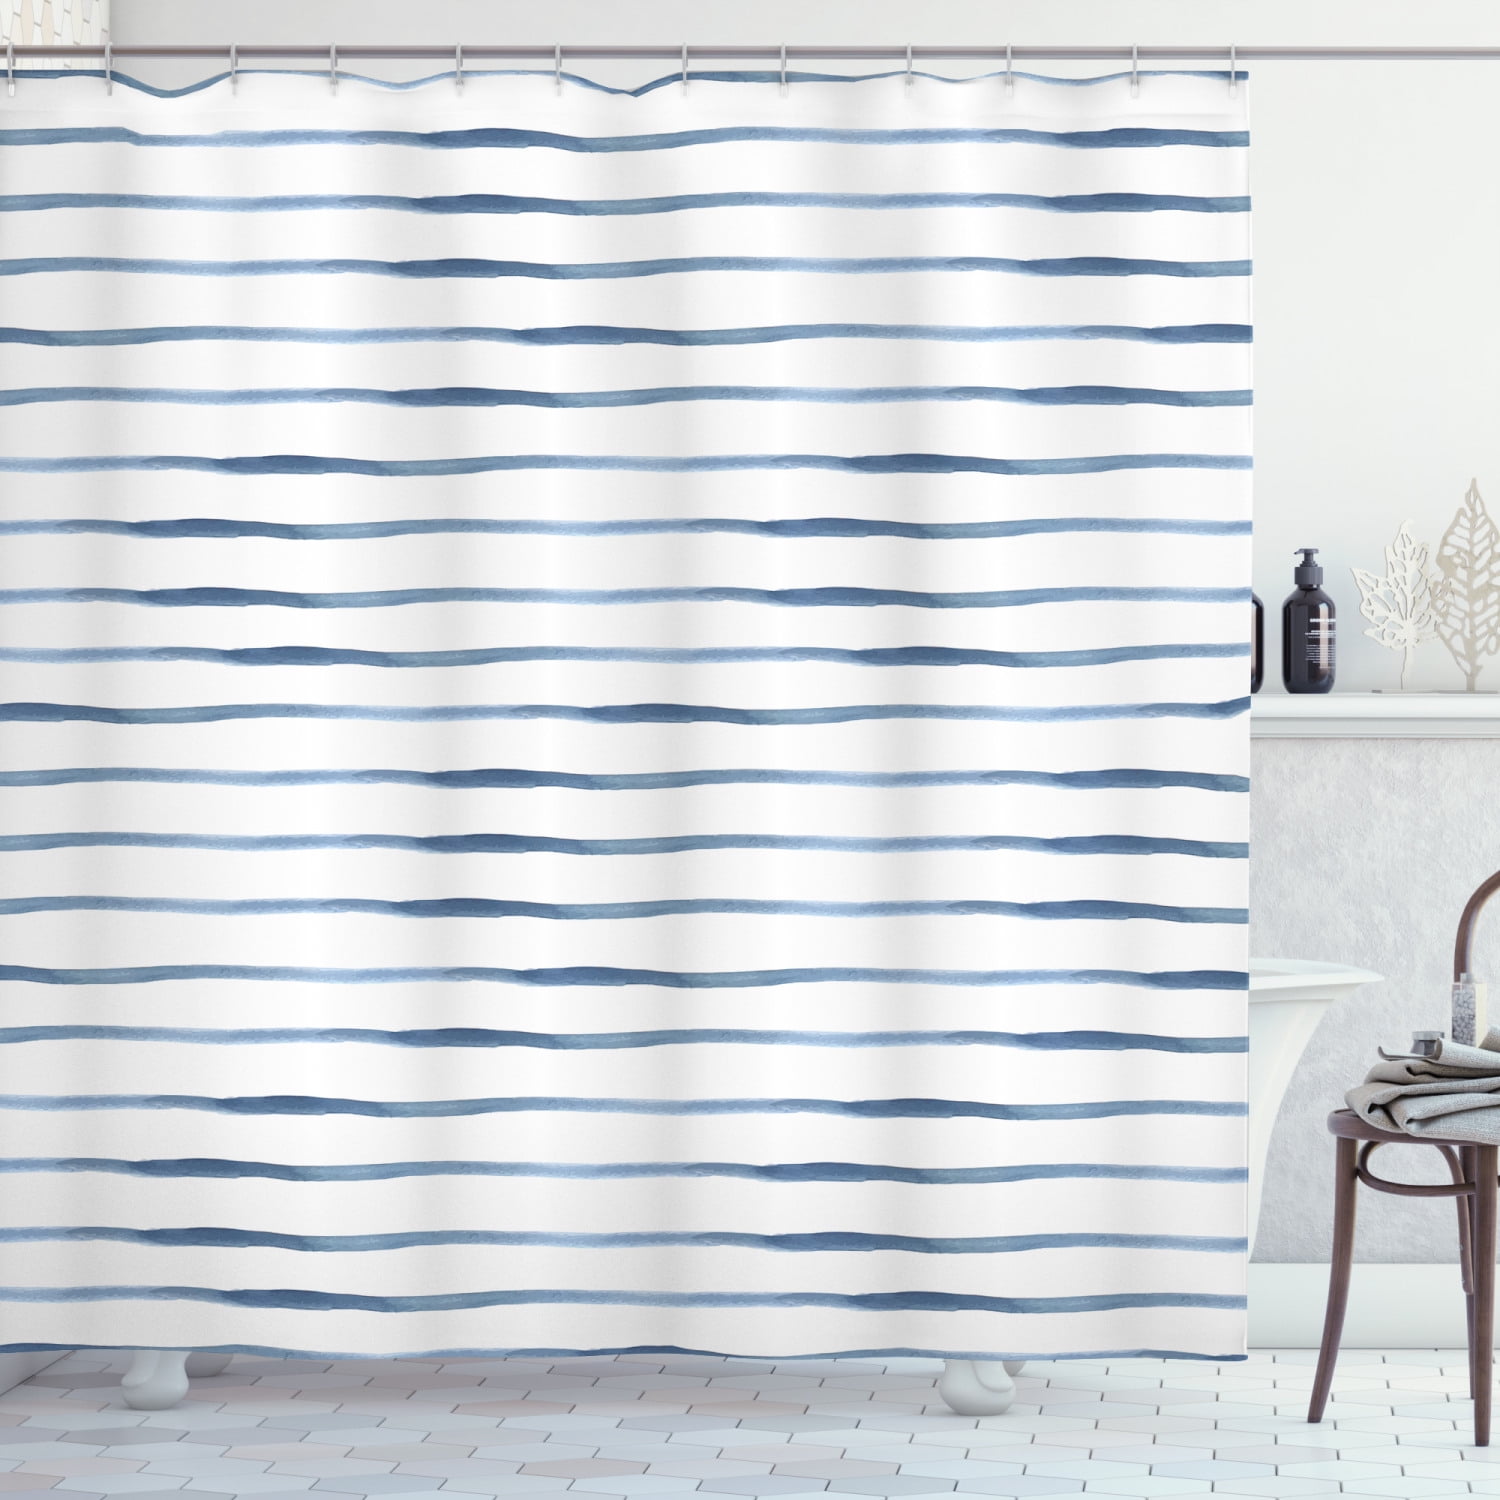 Harbour Stripe Shower Curtain Abstract, Grey And White Horizontal Stripe Shower Curtain